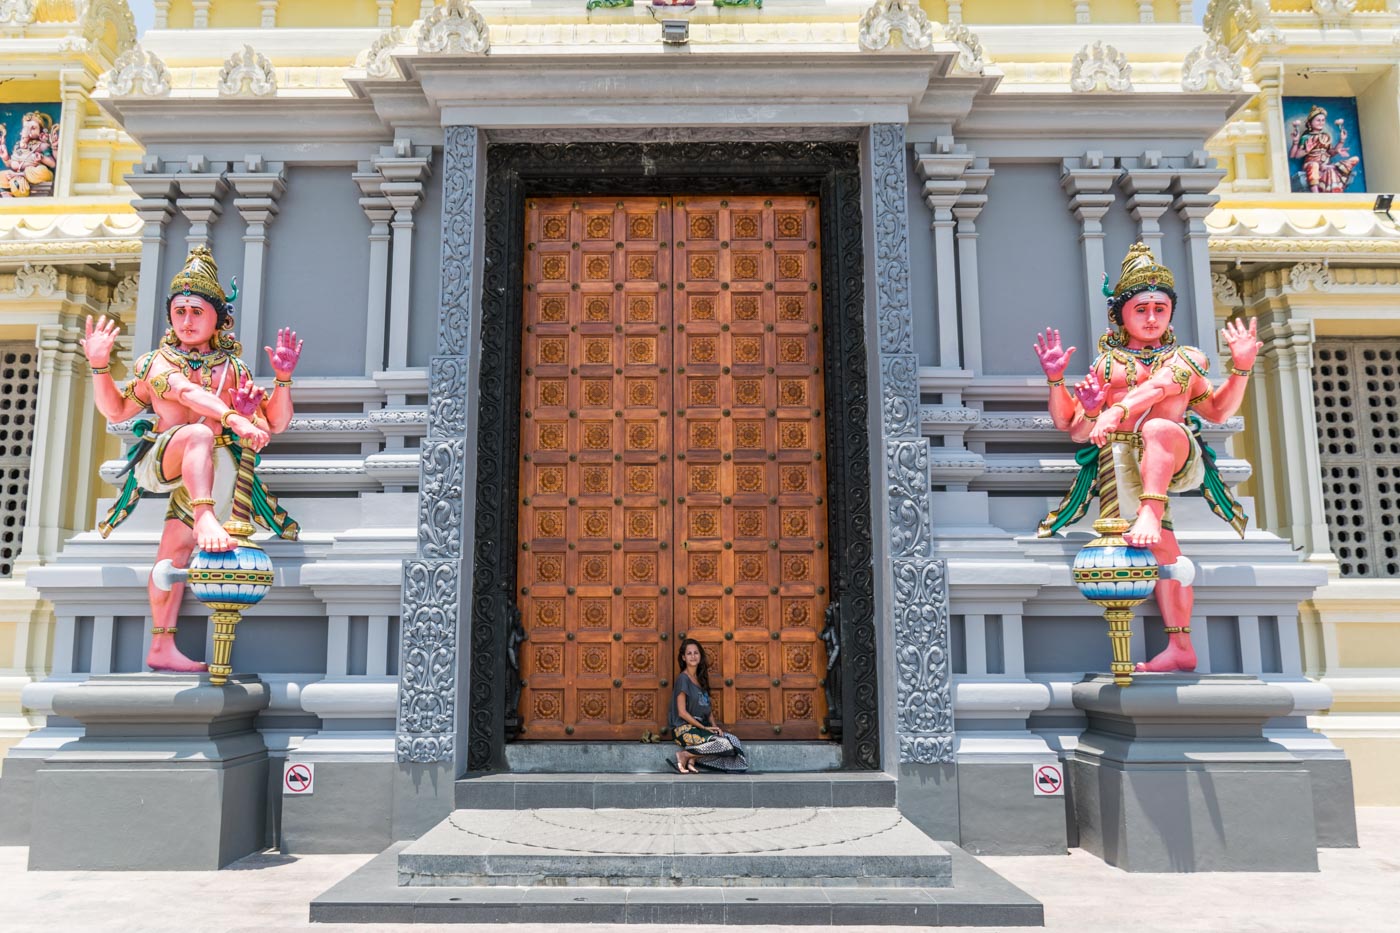 Fernanda sitting in front of the entrance of a temple in Penang with a large door in between two statues